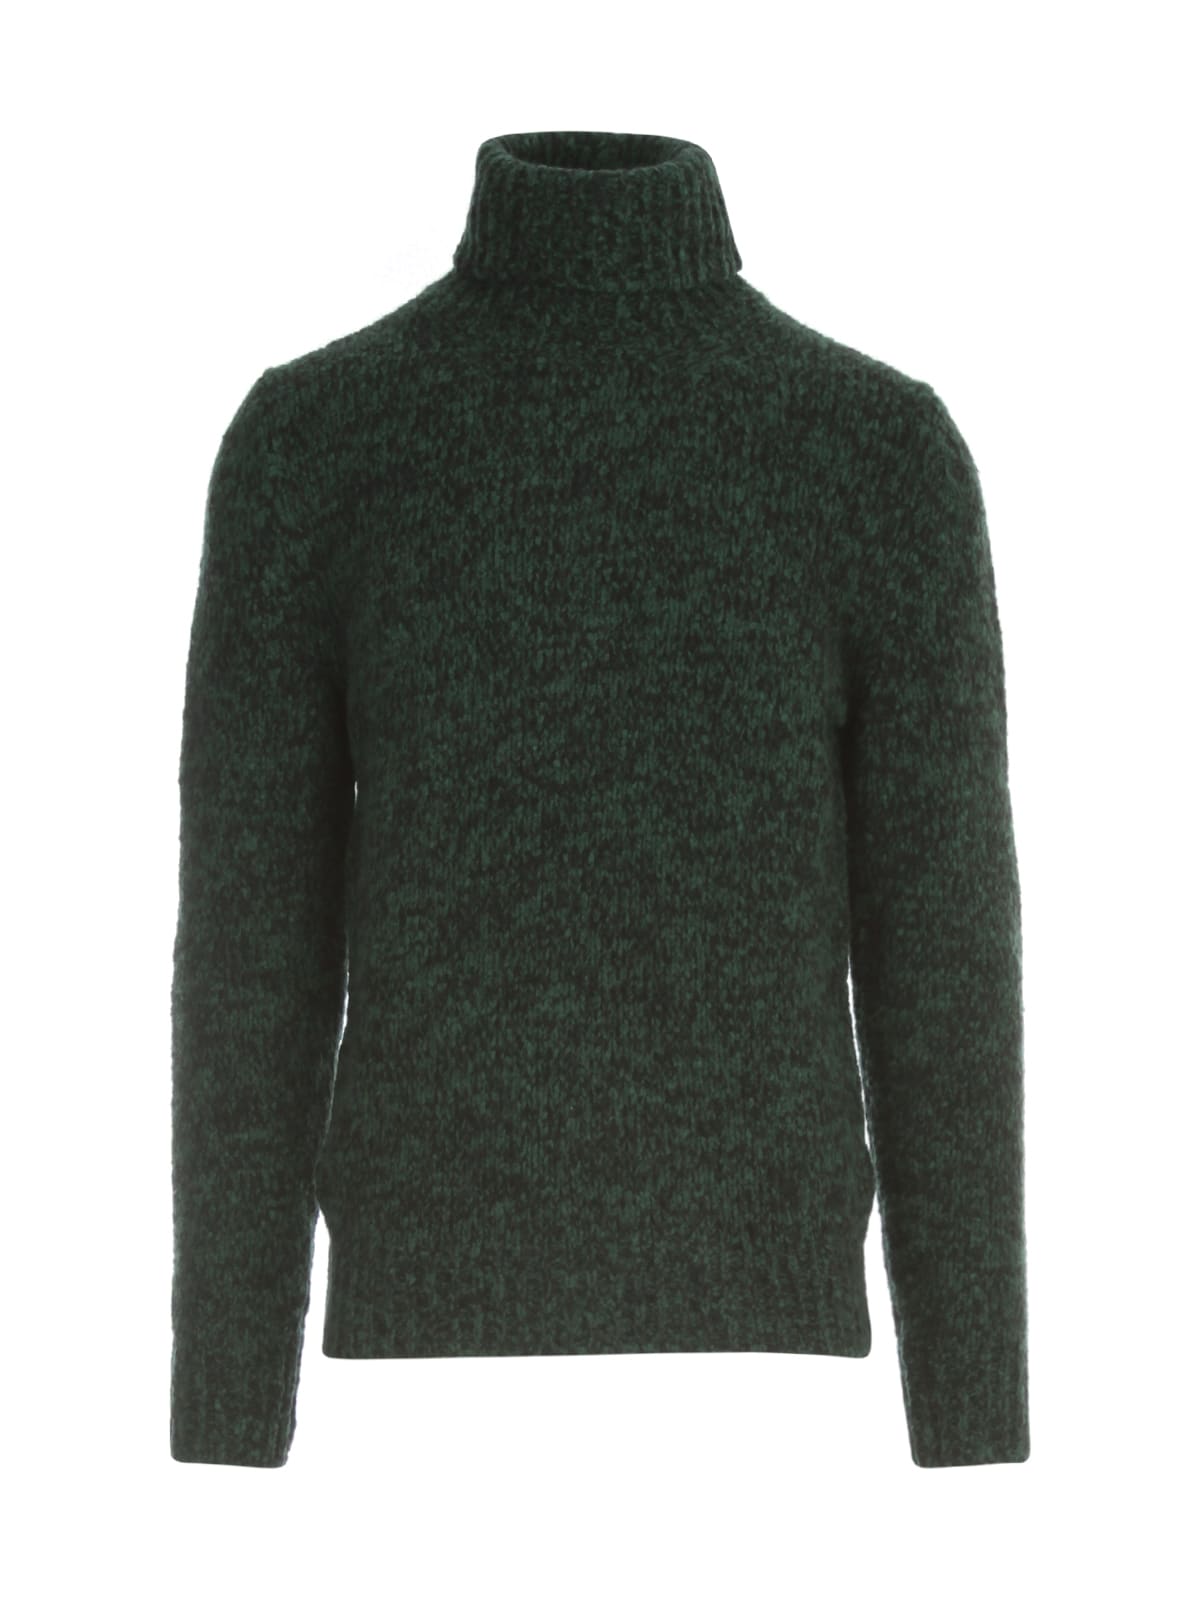 Department 5 Gate Turtle Neck Sweater